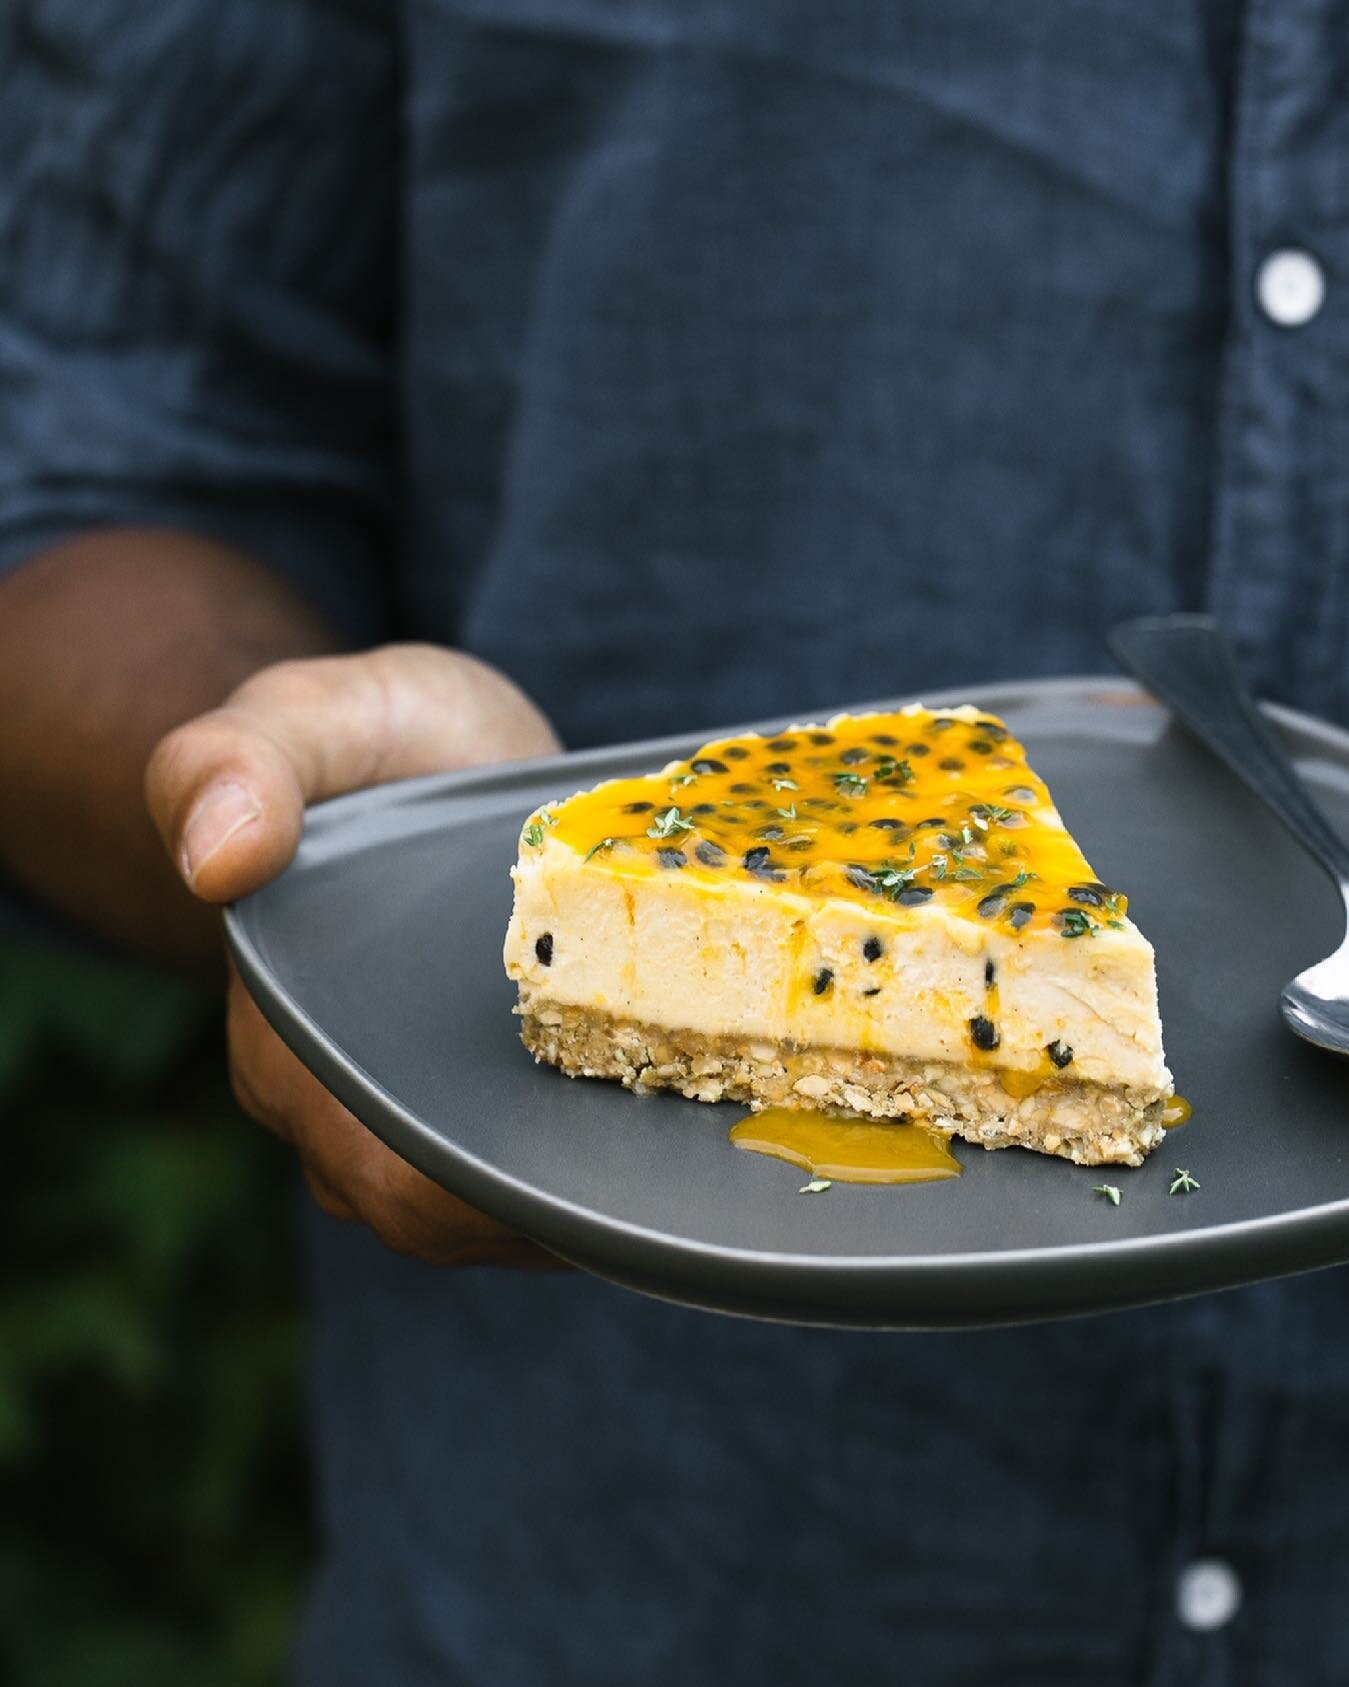 Passionfruit &amp; Lime Cheesecake - every mouthful provides you with an insane amount of creamy + crunchy satisfaction with a hit of zesty lime and punchy passionfruit&hellip;.it&rsquo;s downright #delicious 🤤 and also quite refreshing!⁣⁣
⁣
This is